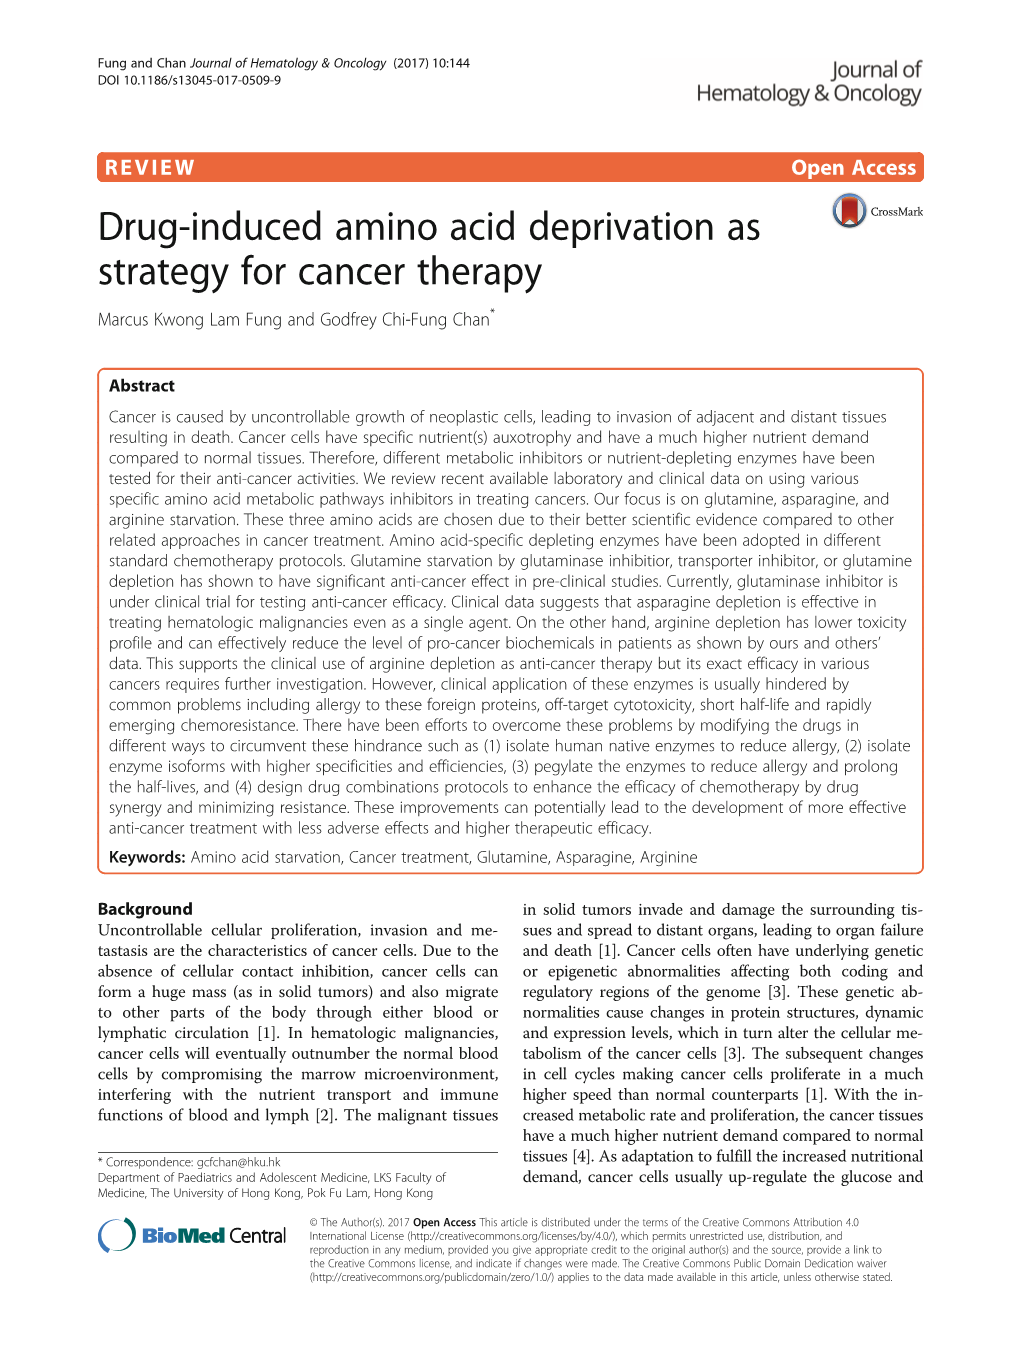 Drug-Induced Amino Acid Deprivation As Strategy for Cancer Therapy Marcus Kwong Lam Fung and Godfrey Chi-Fung Chan*